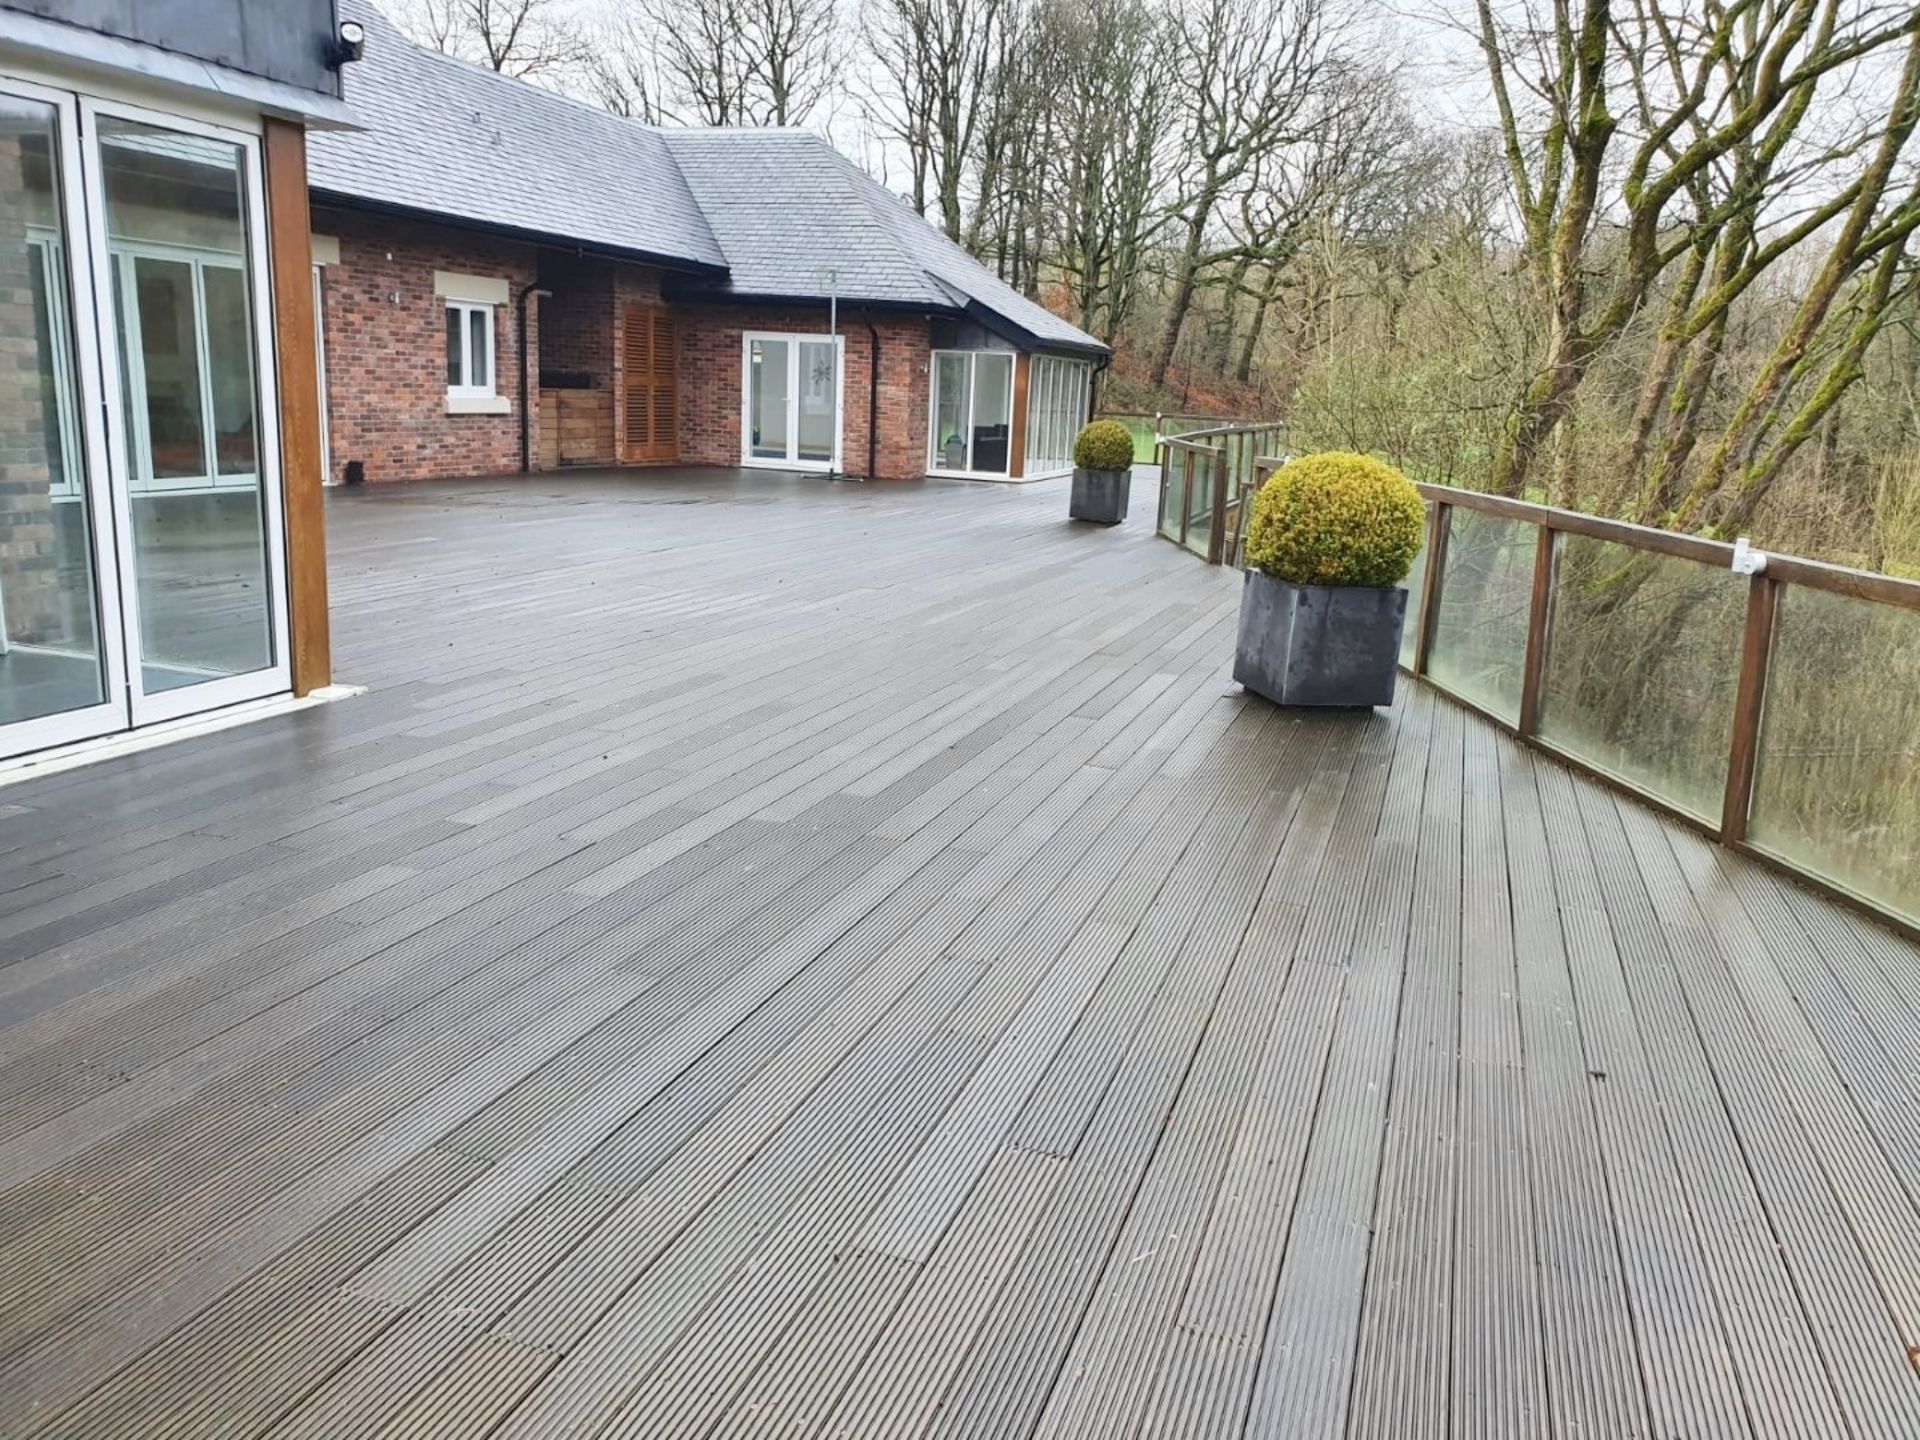 Large Quantity Of Outdoor Timber Decking & Glazed Balustrade - CL487 - Location: Wigan WN1 *NO VAT* - Image 2 of 21